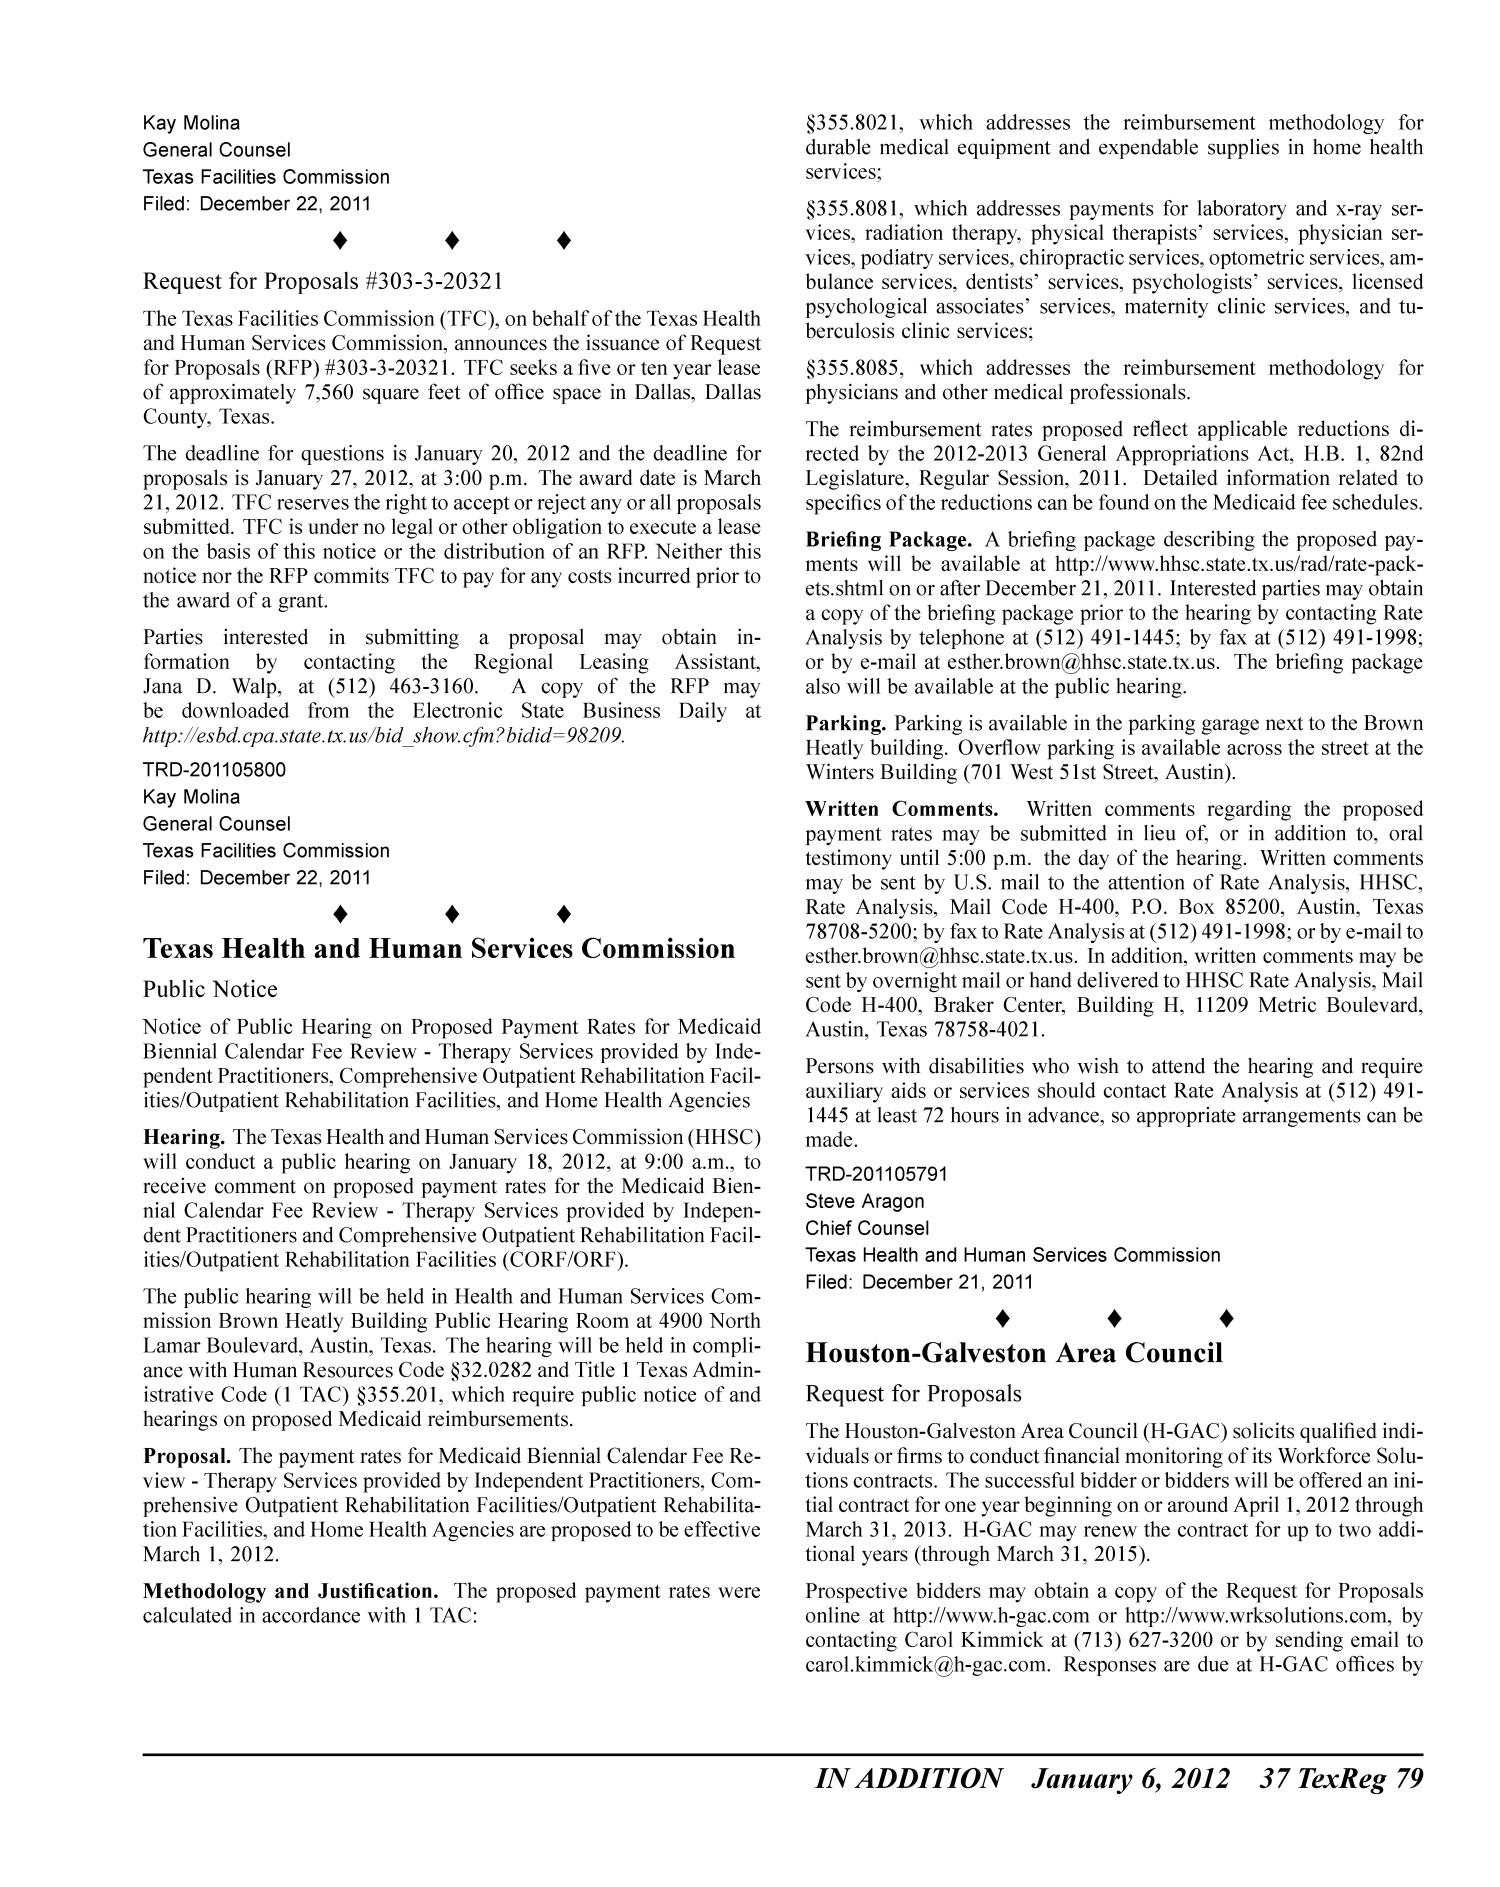 Texas Register, Volume 37, Number 1, Pages 1-84, January 6, 2012
                                                
                                                    79
                                                